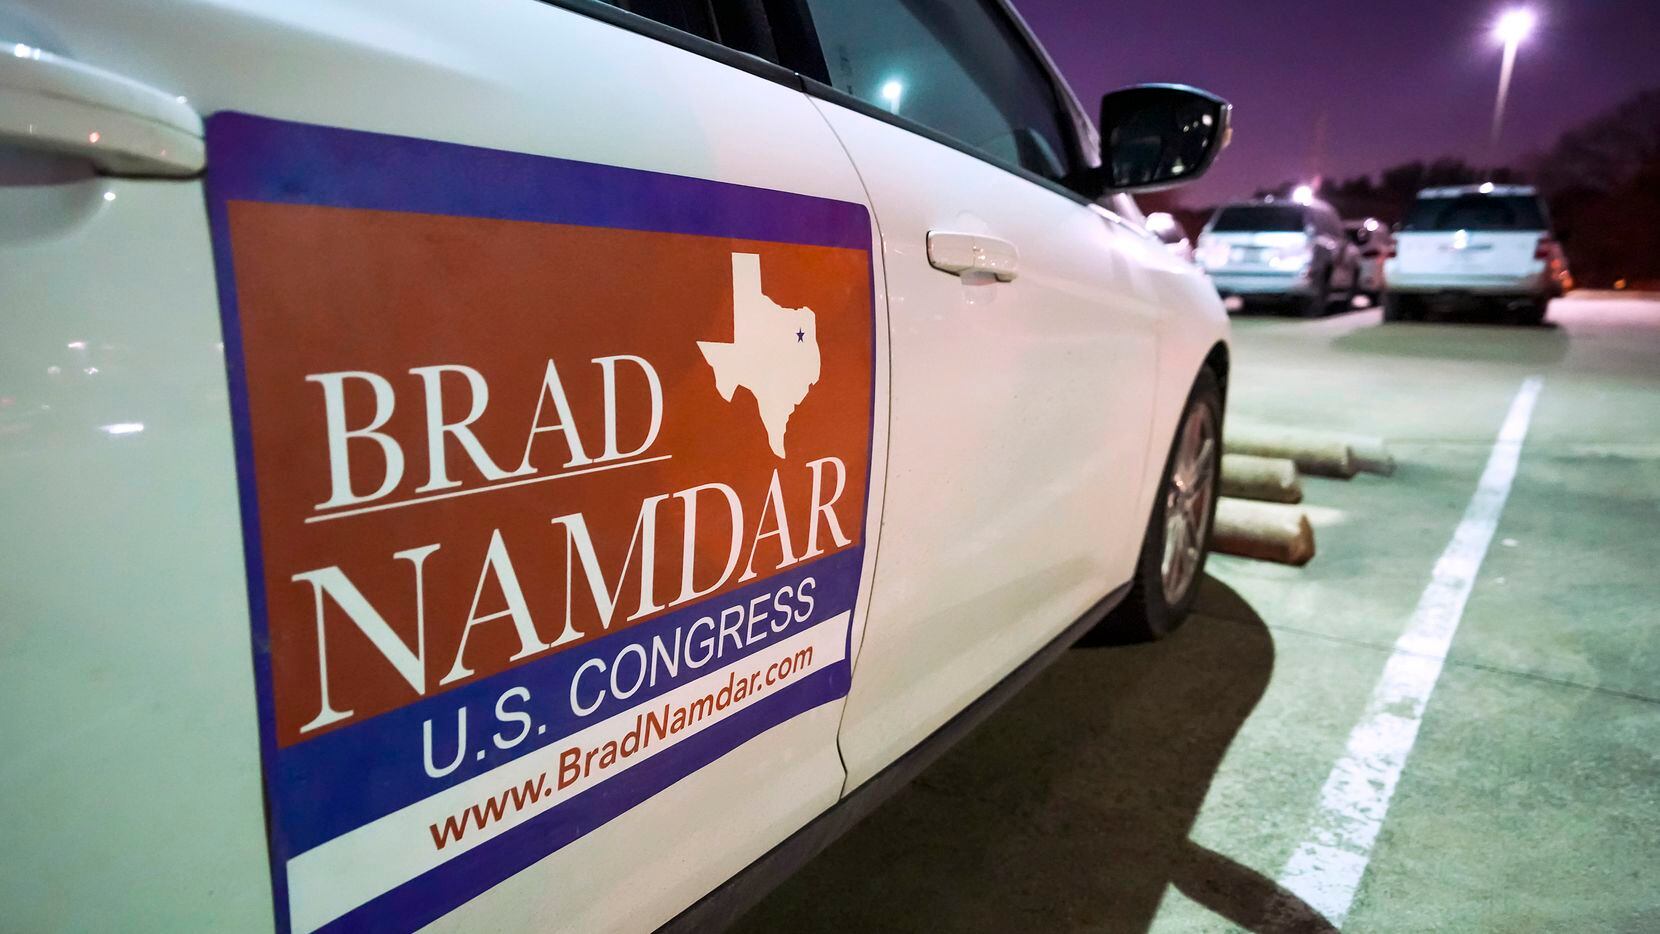 A sign for candidate Brad Namdar is seen on a vehicle during a forum Feb. 9 at the Museum of...